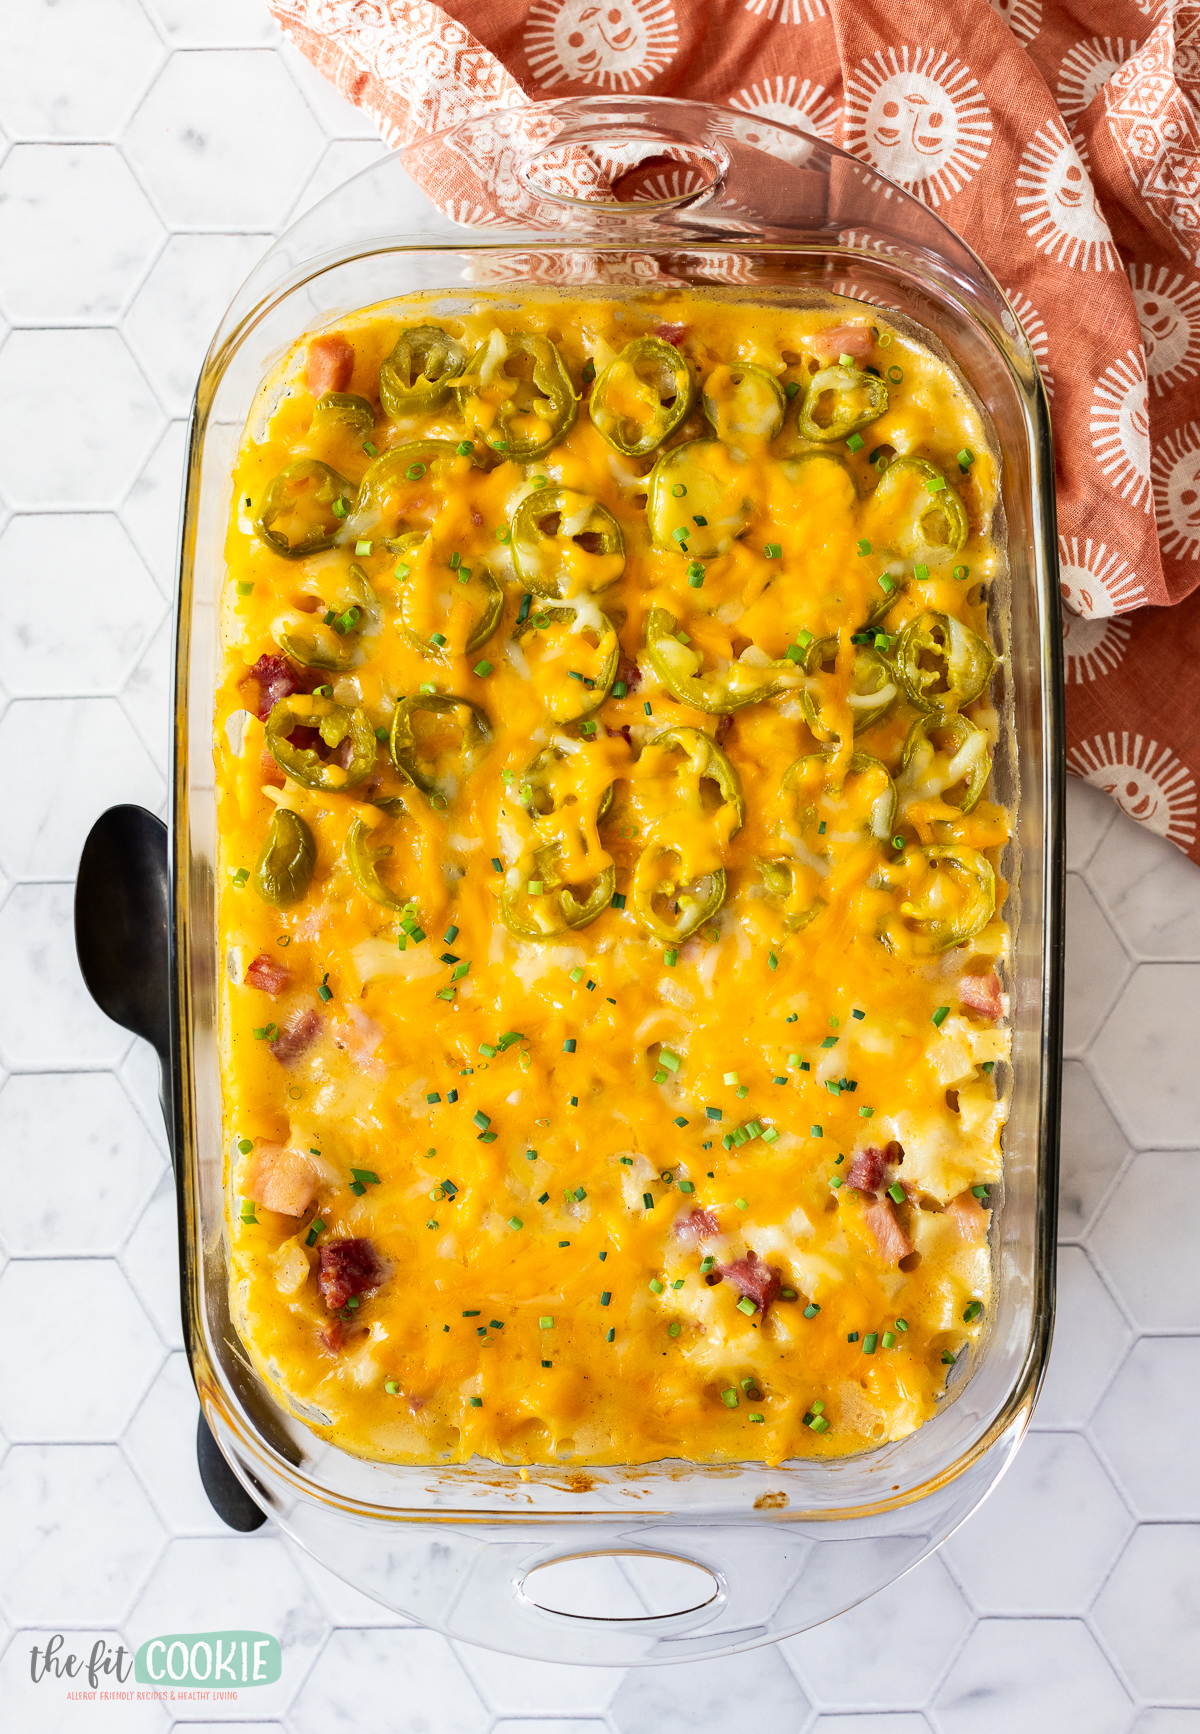 A dairy-free casserole dish filled with cheesy potatoes and jalapenos.